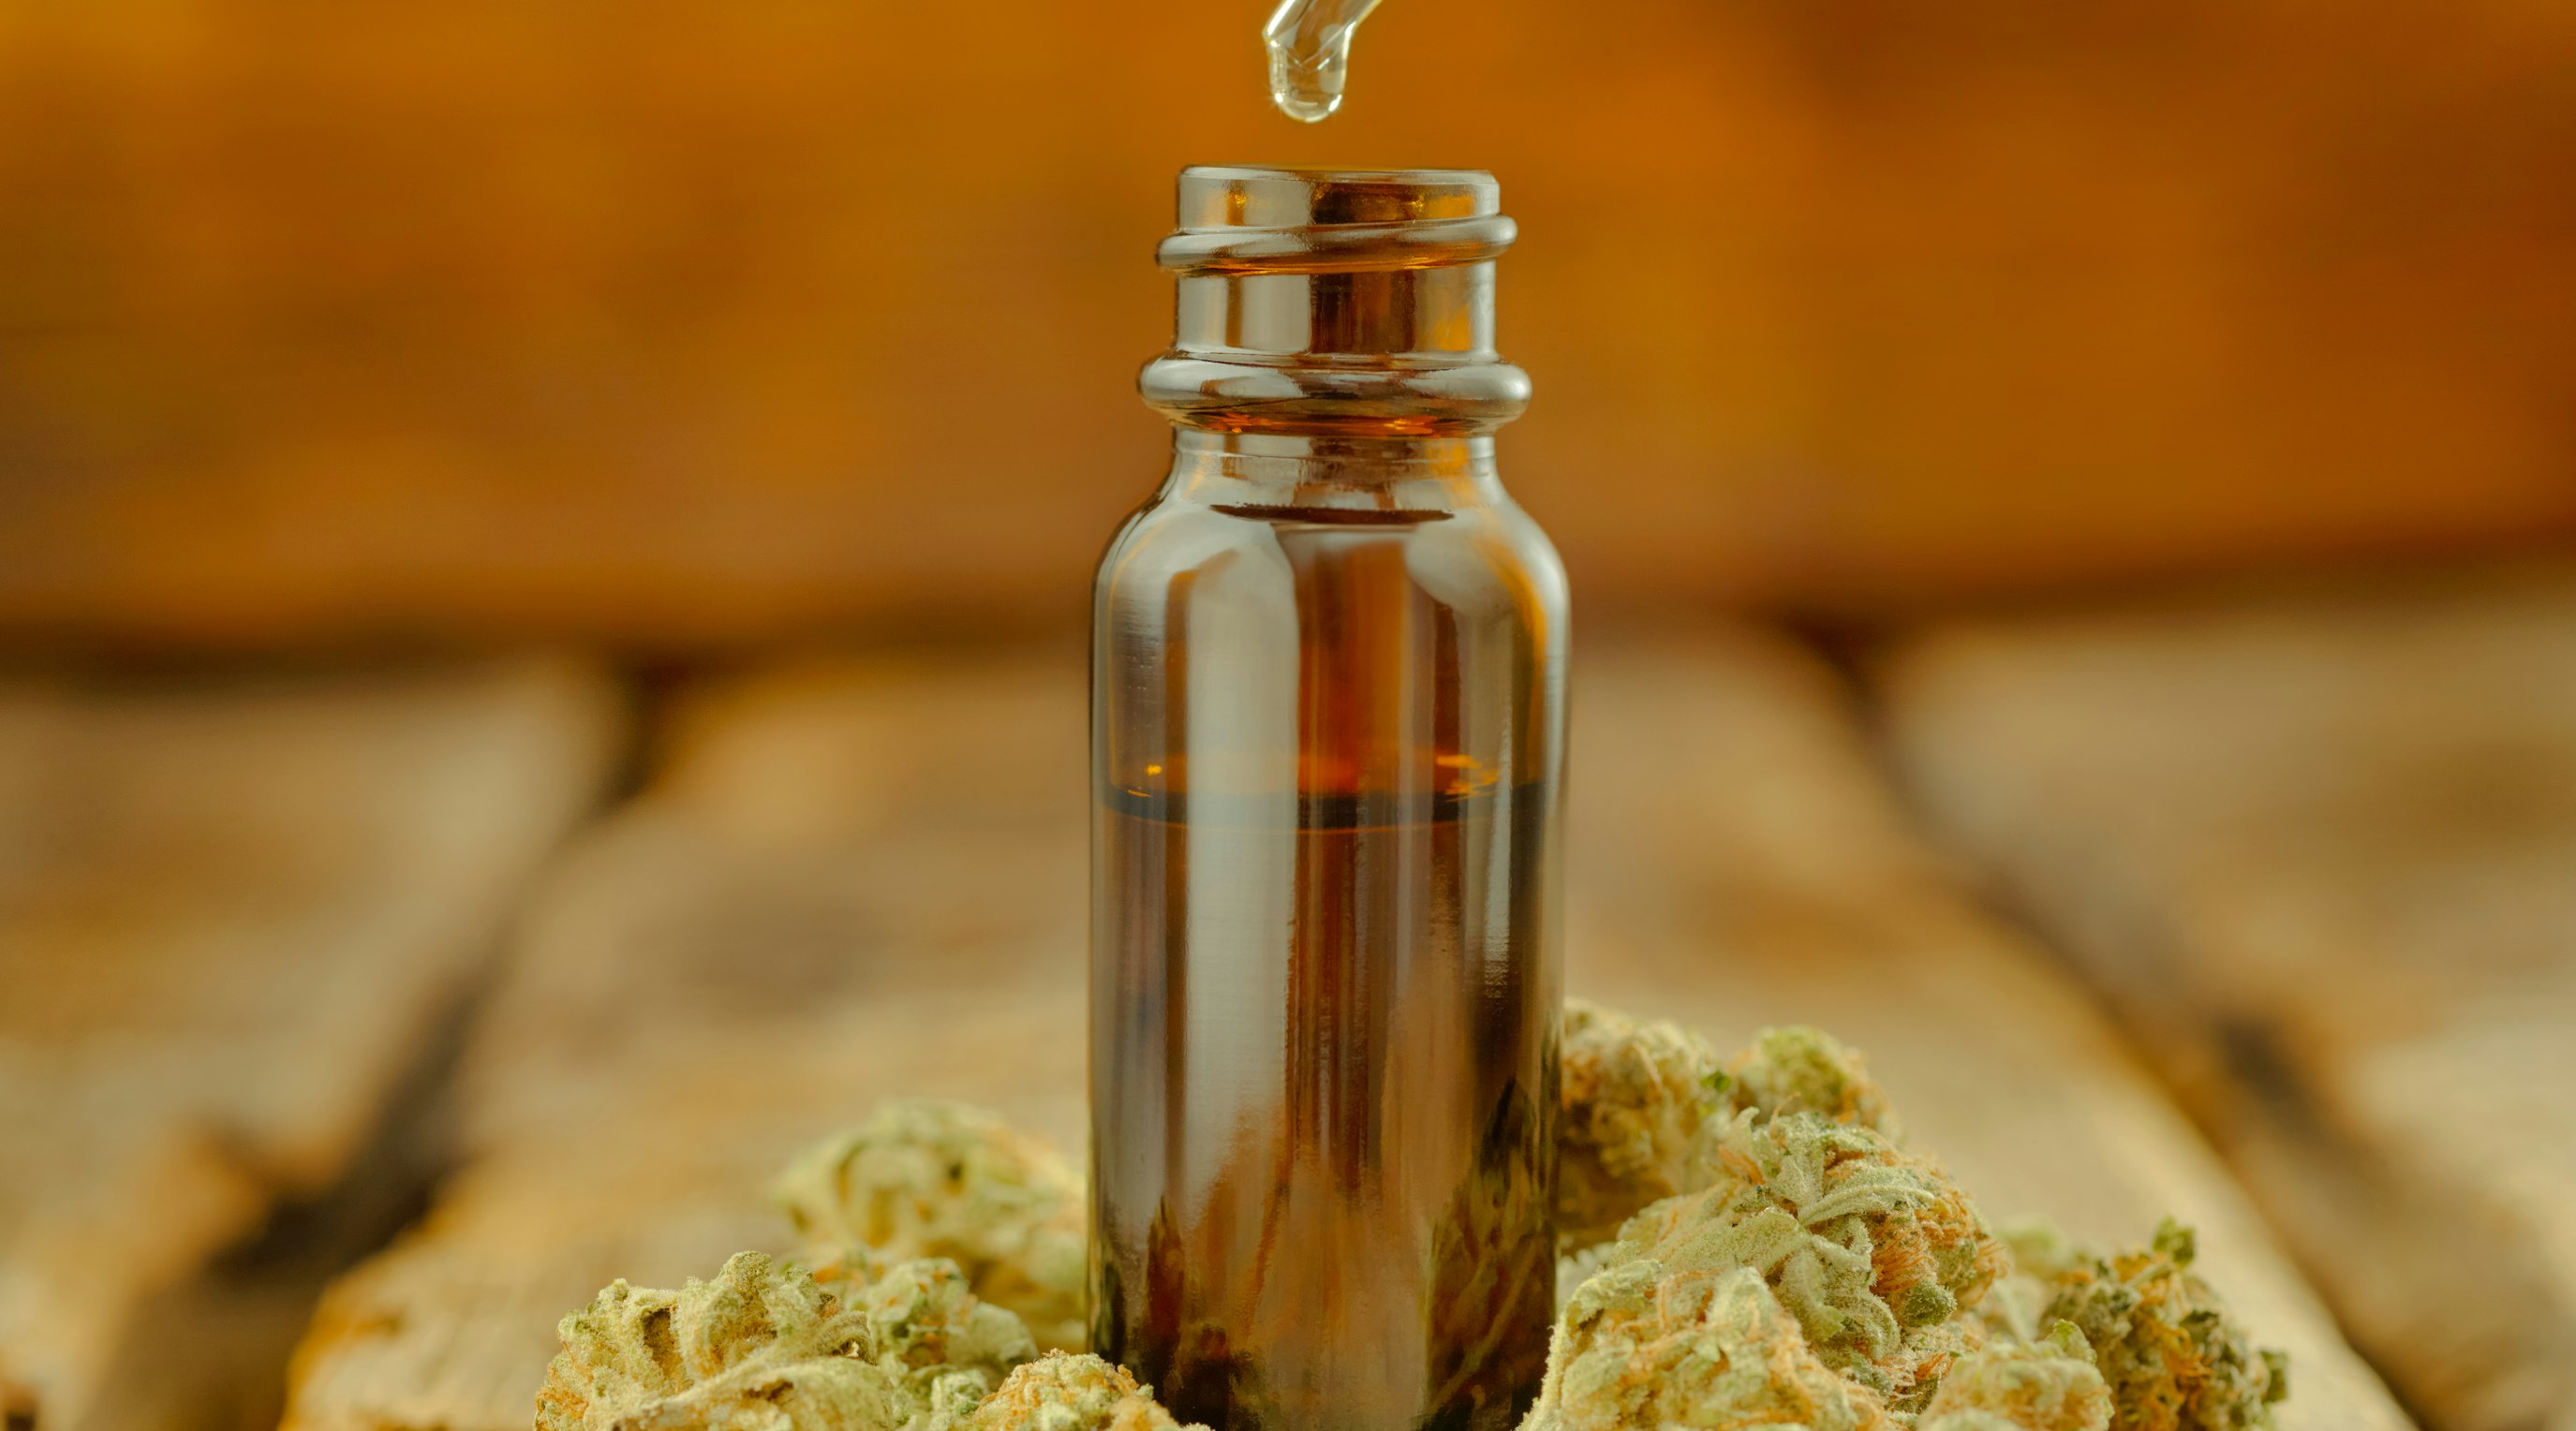 A comprehensive guide on how to take THC oil